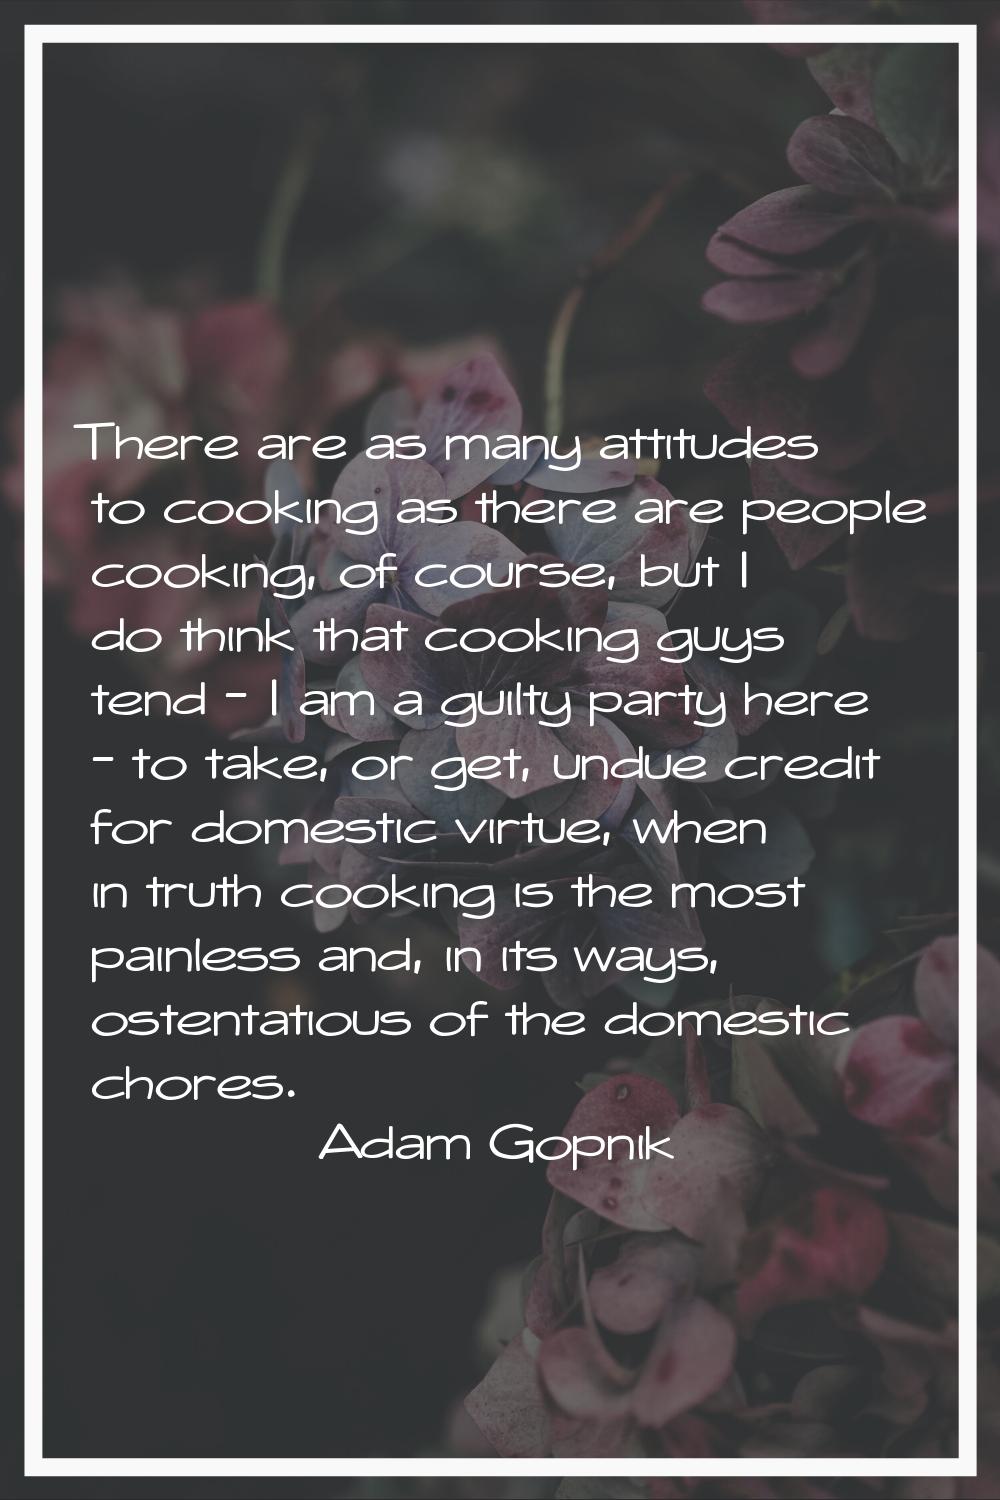 There are as many attitudes to cooking as there are people cooking, of course, but I do think that 